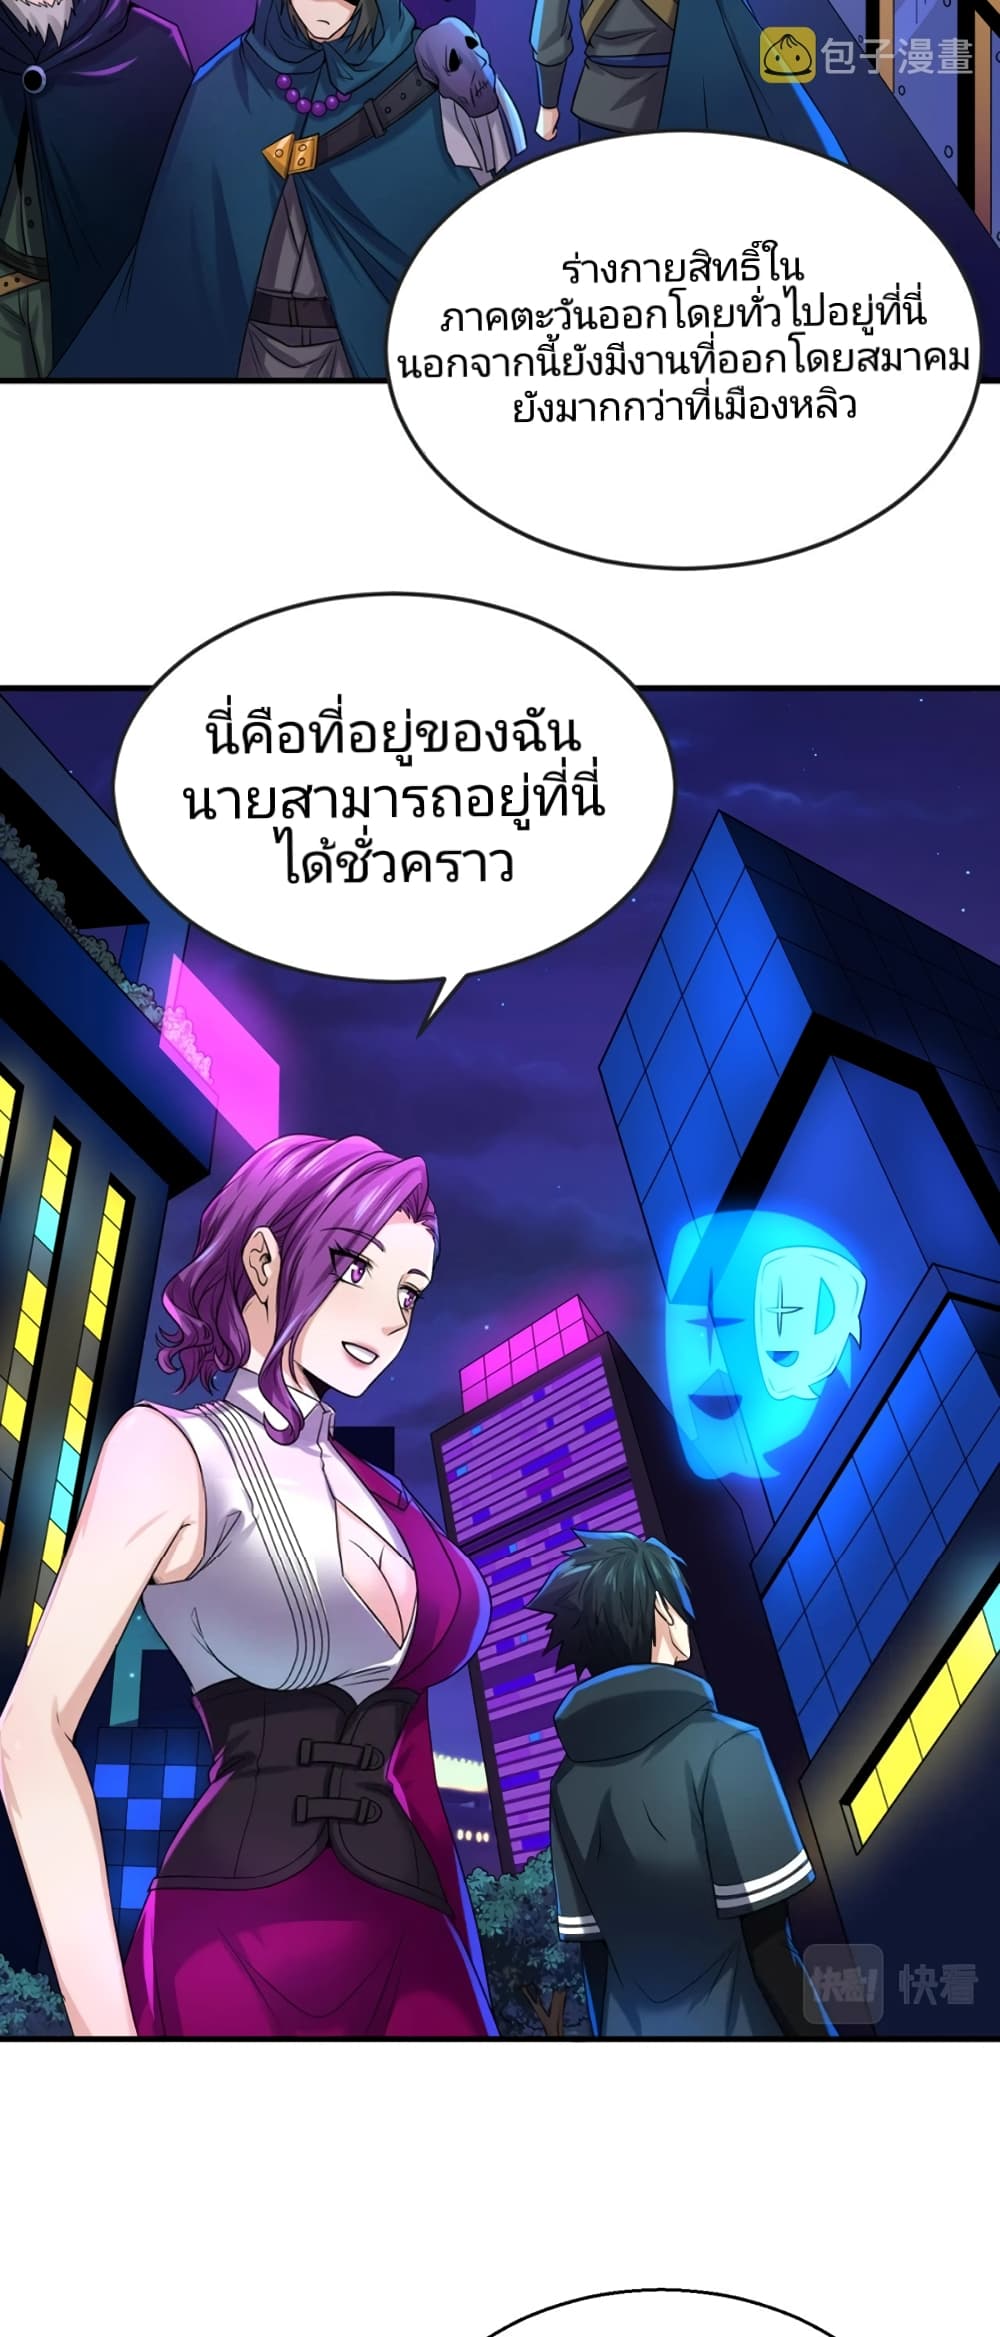 The Age of Ghost Spirits à¸à¸­à¸à¸à¸µà¹ 20 (12)